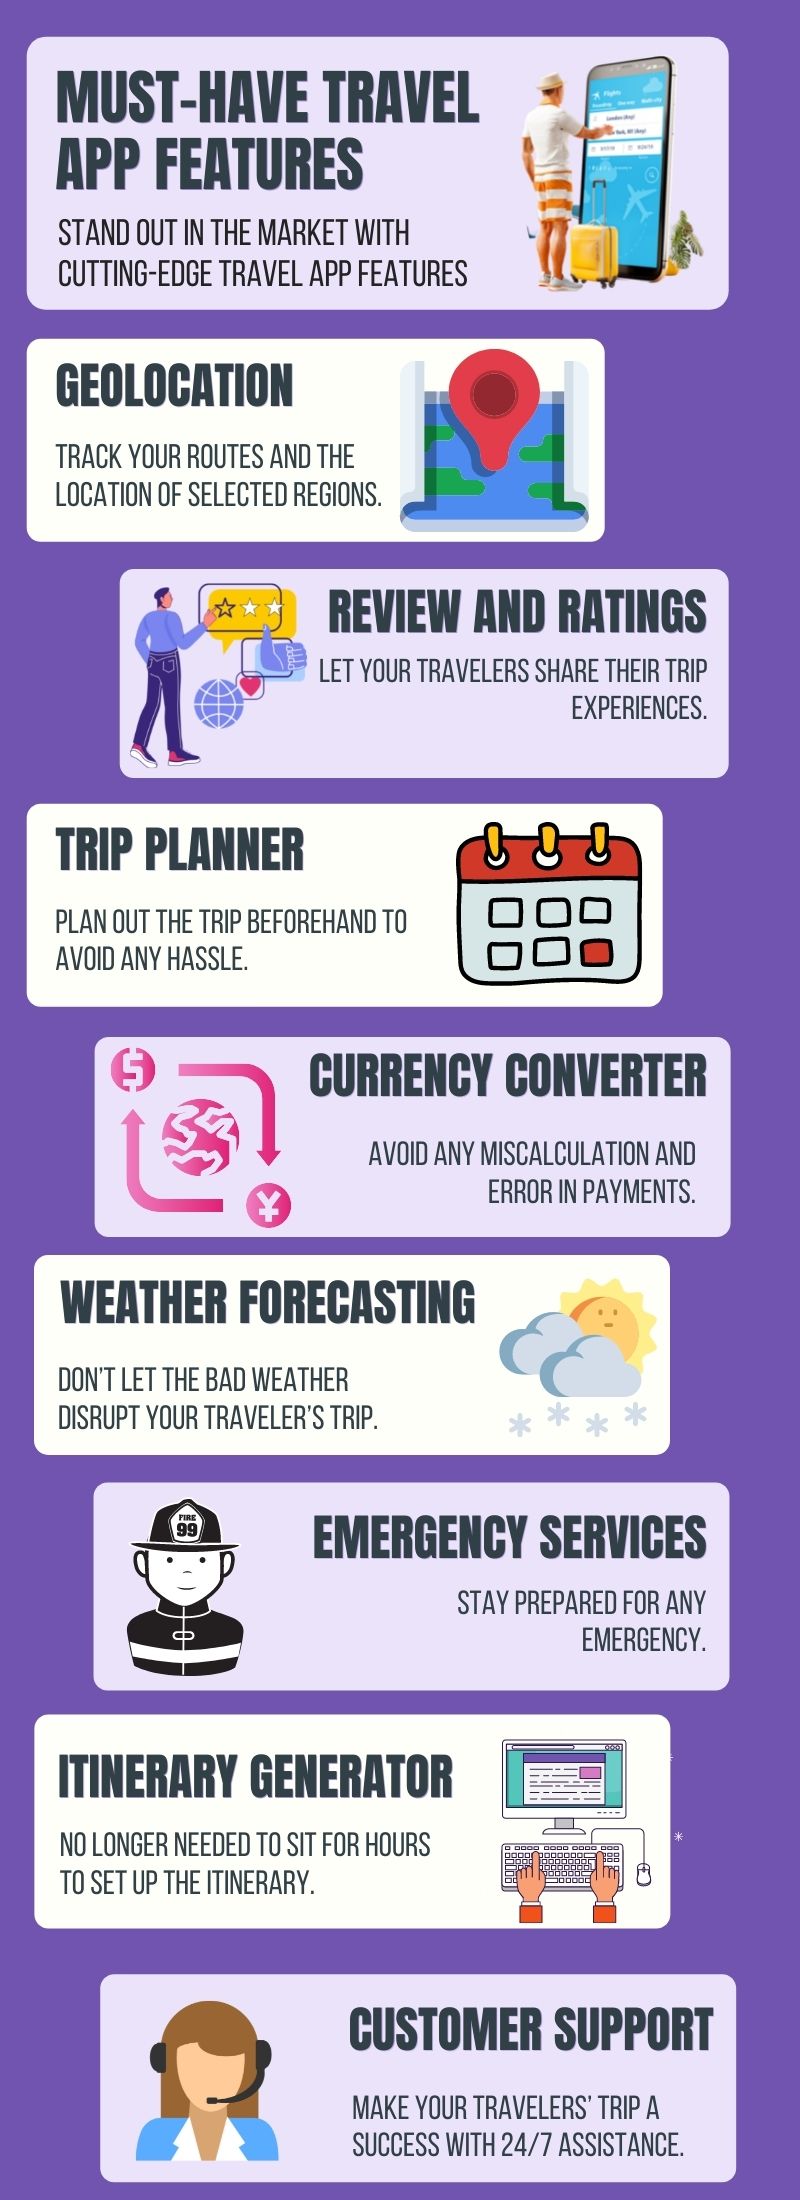 Must-Have Travel App Features